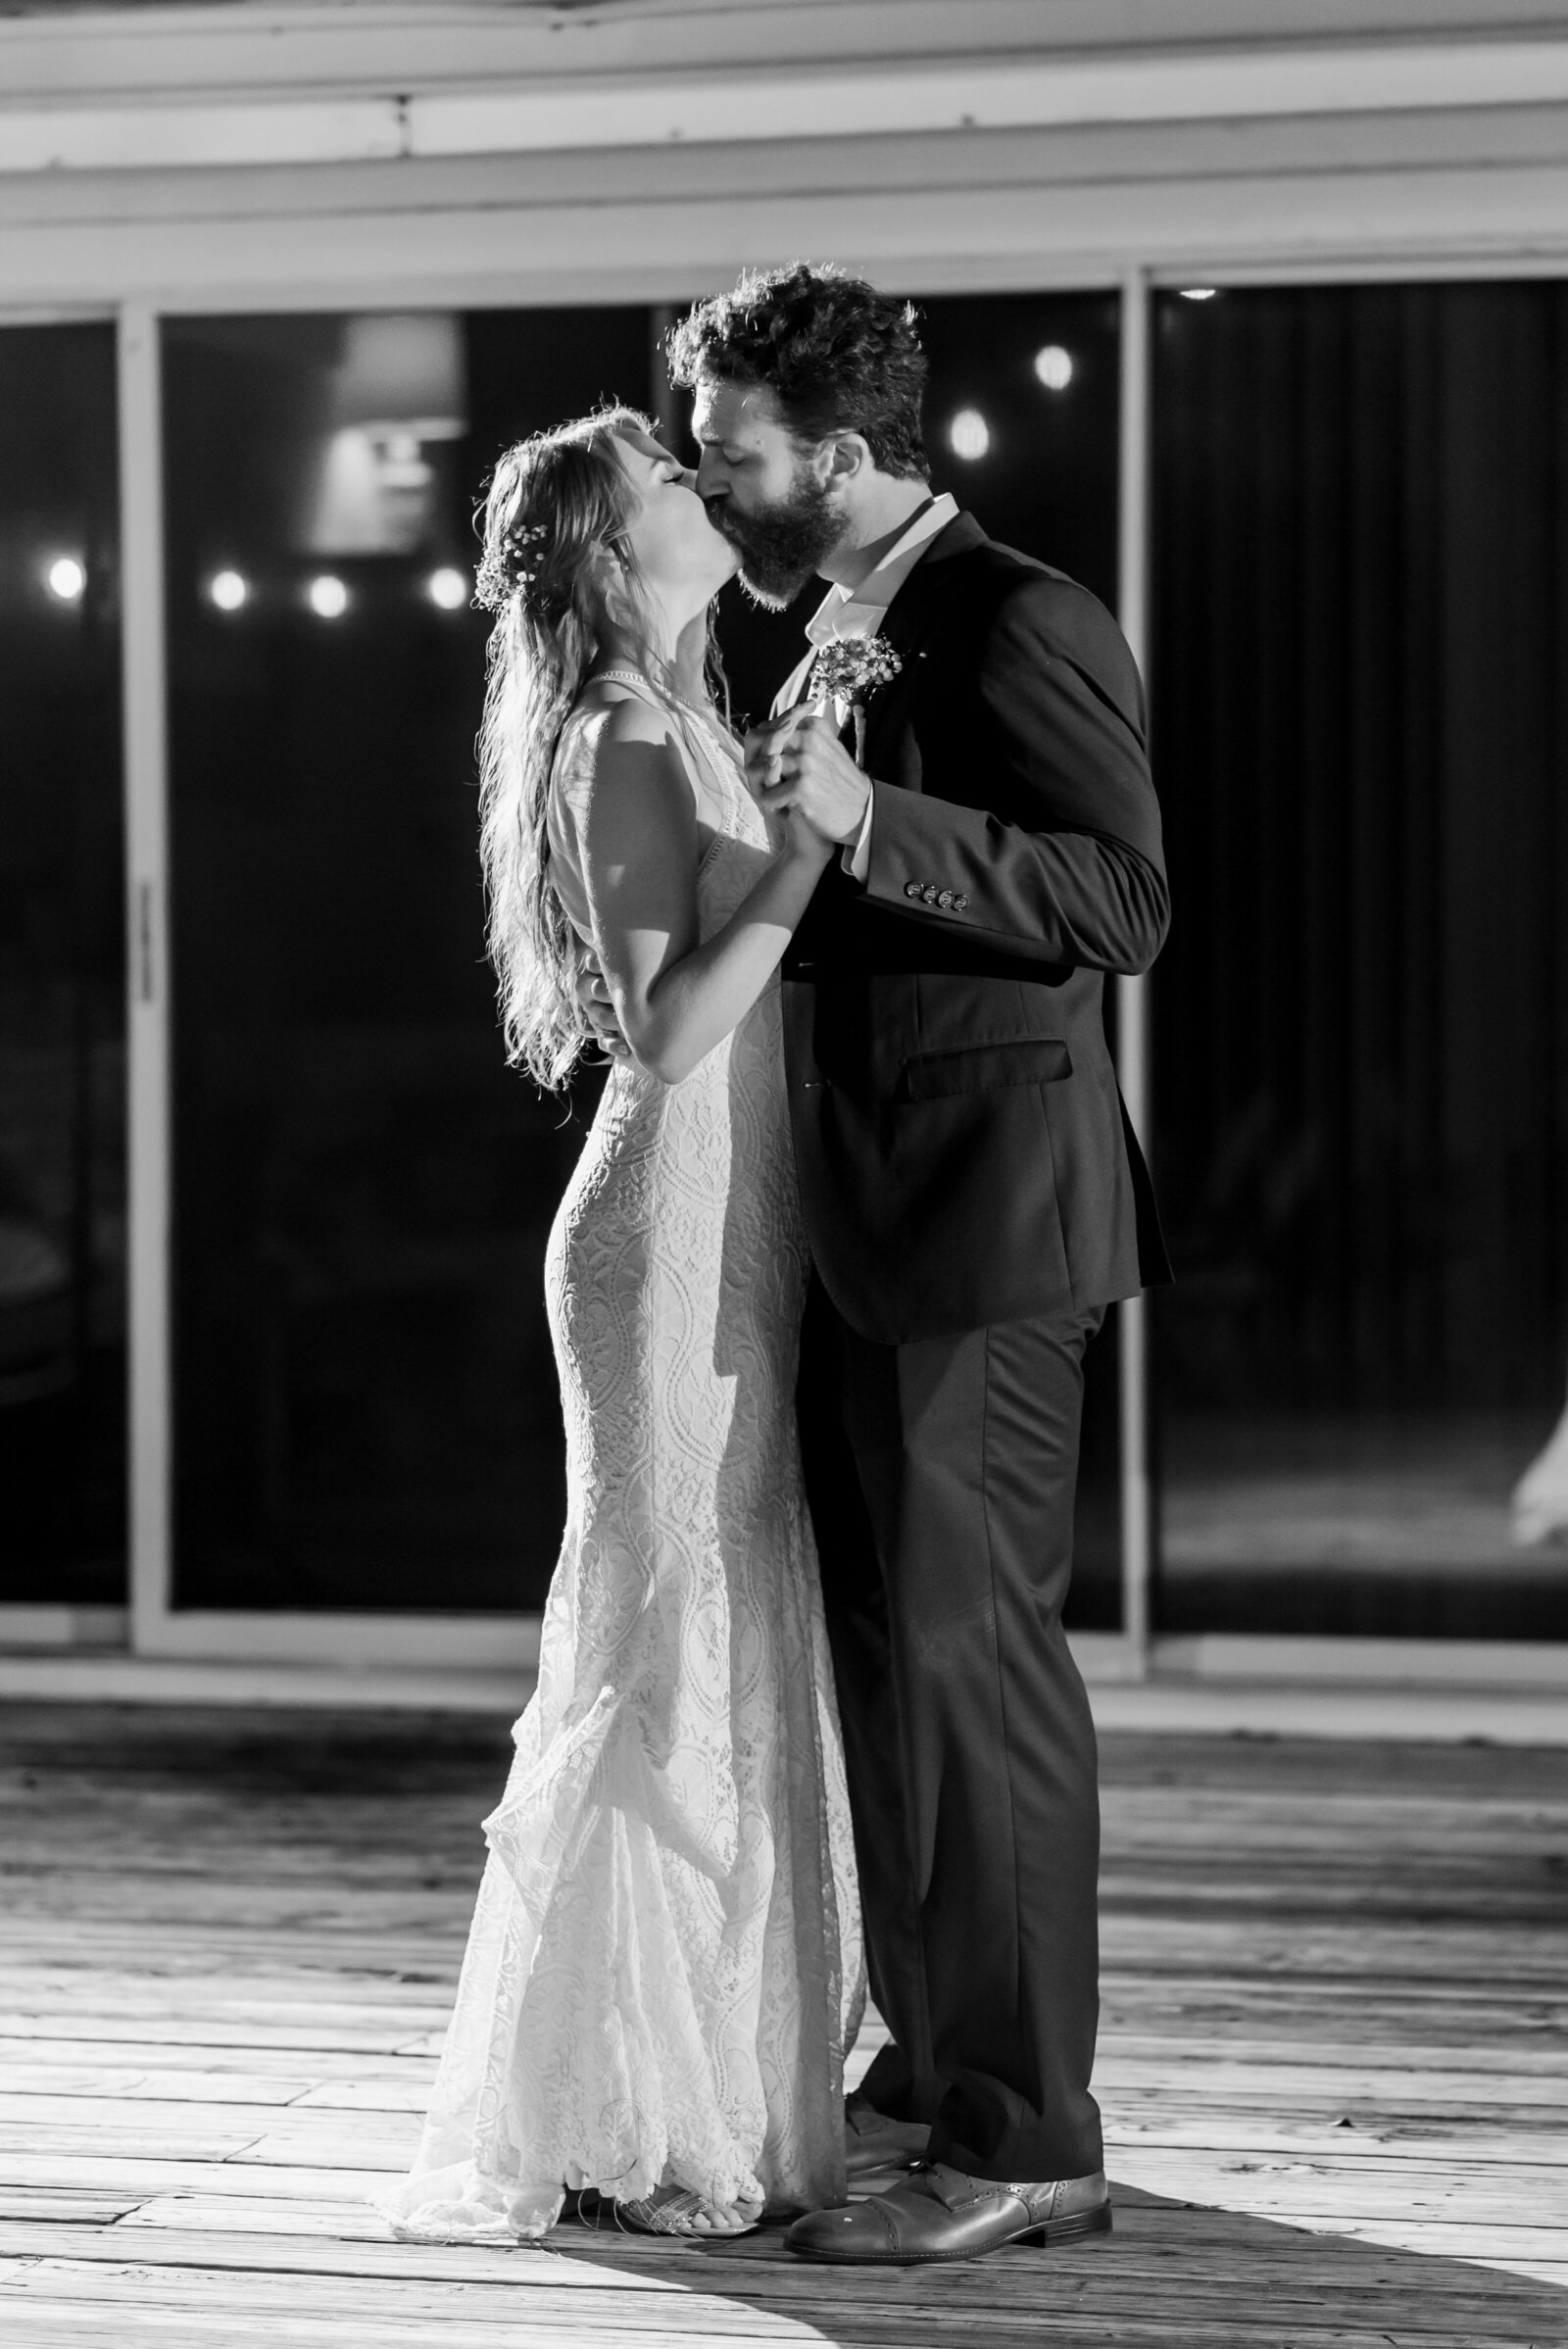 black and white photograph of bride and groom kissing during their first dance at their wedding reception